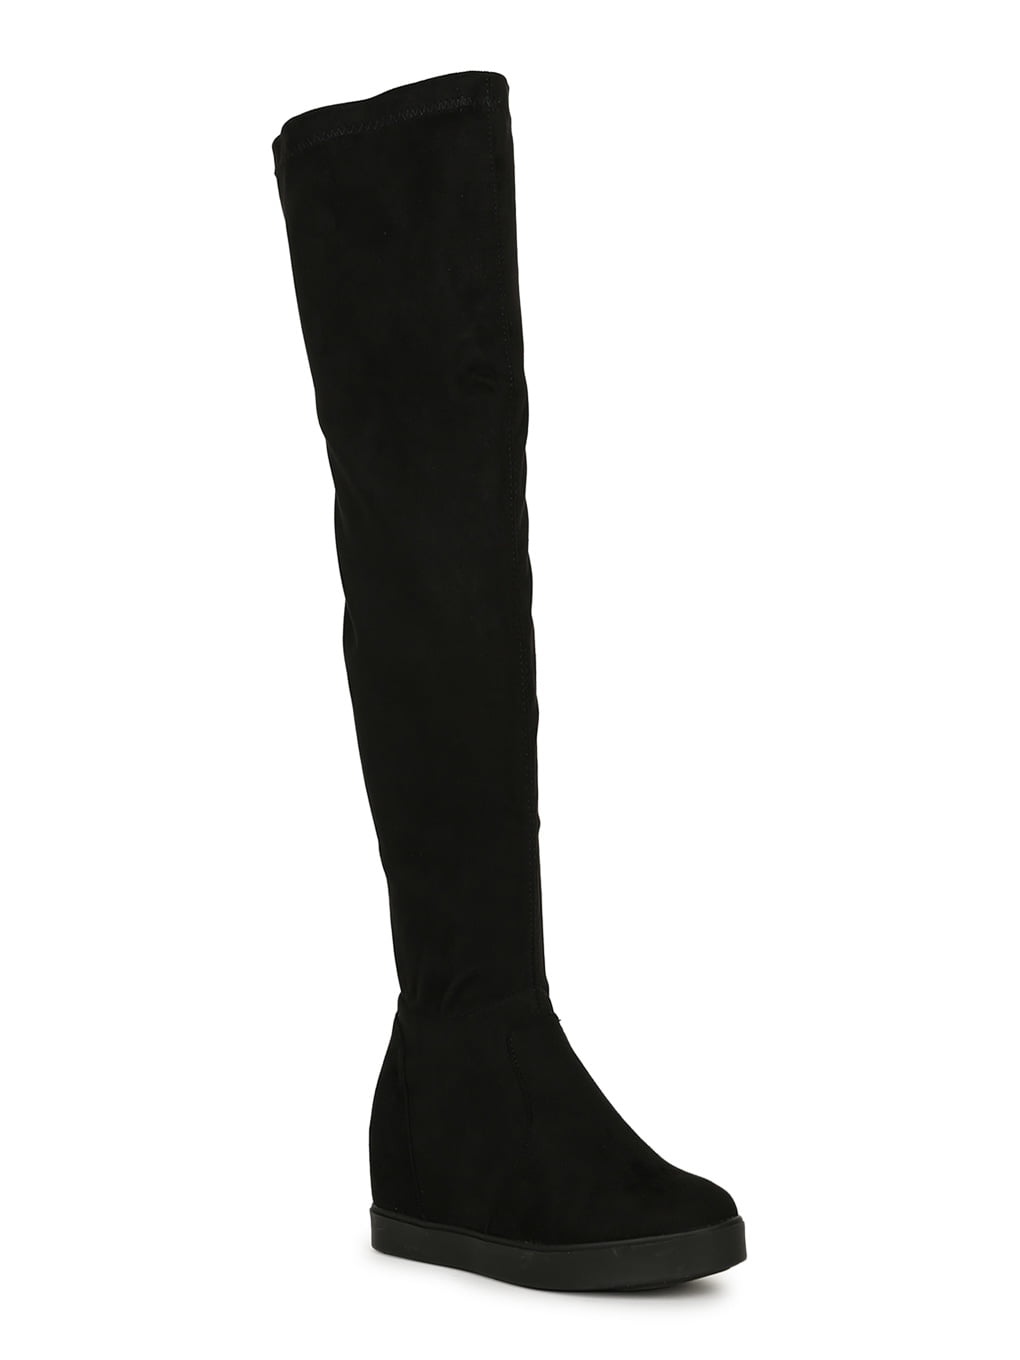 NEW Women's Fashion Thigh Knee High Wedge High Heel  Boots Shoes Size 5.5-10 